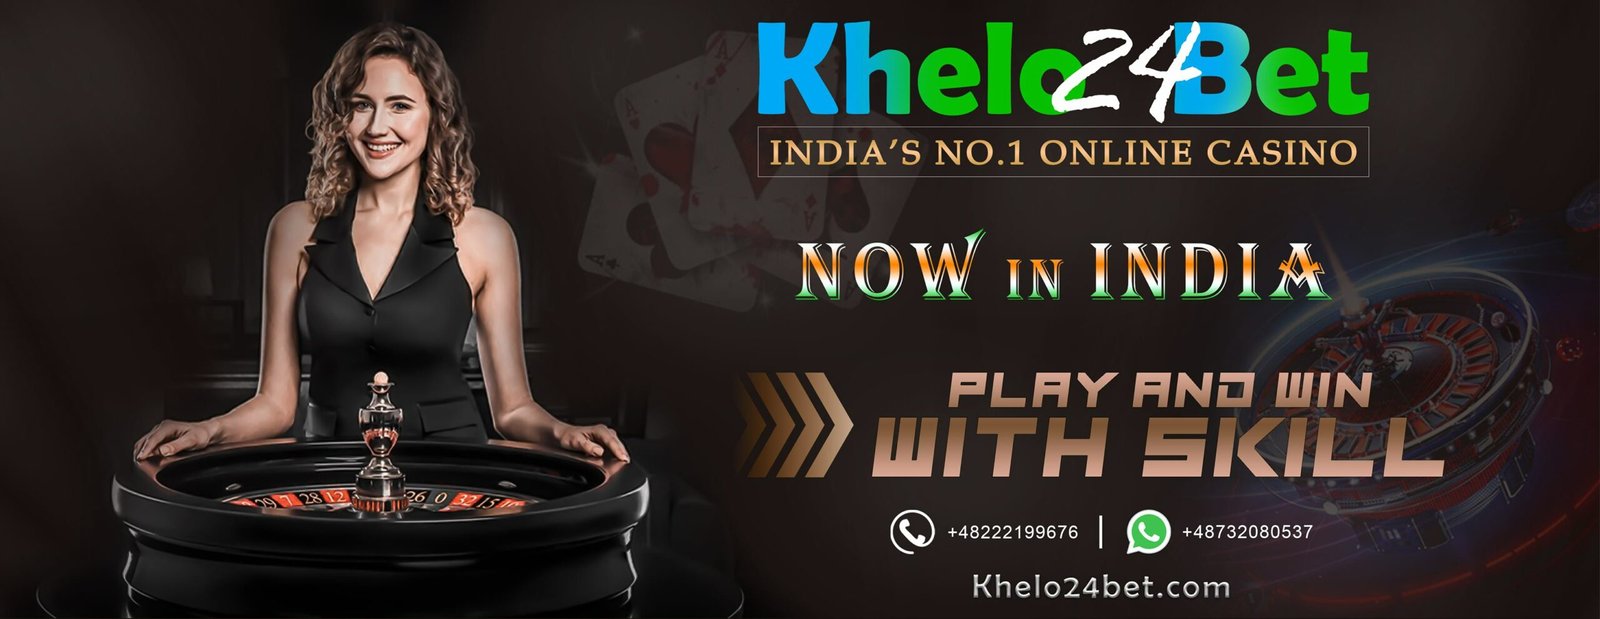 Basic Information About Khelo24bet in India